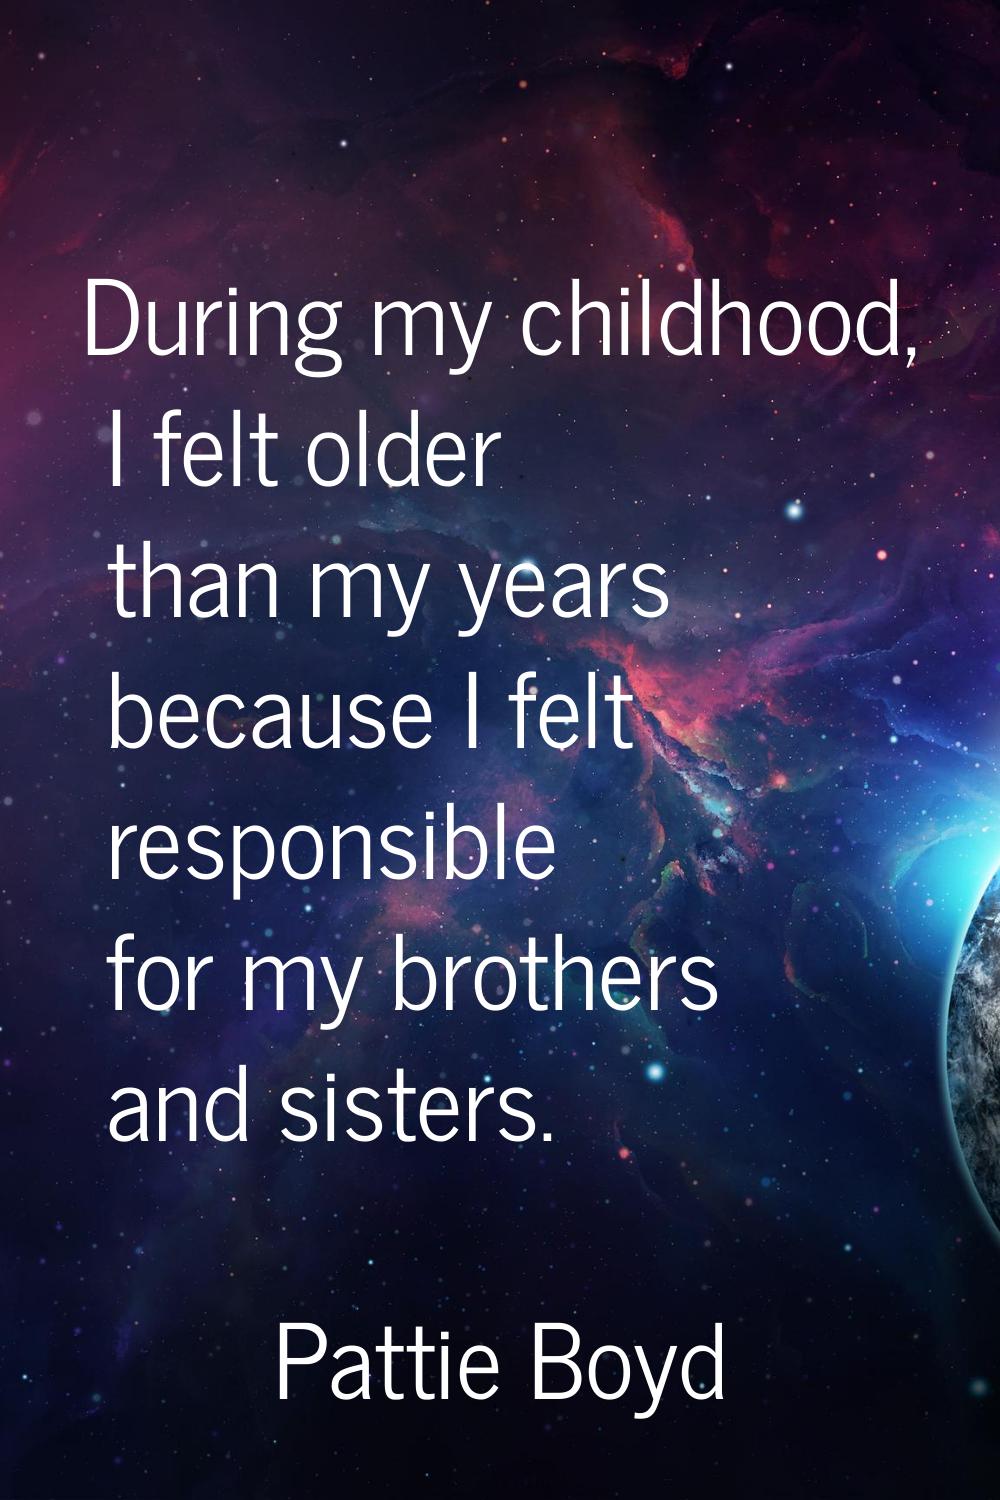 During my childhood, I felt older than my years because I felt responsible for my brothers and sist